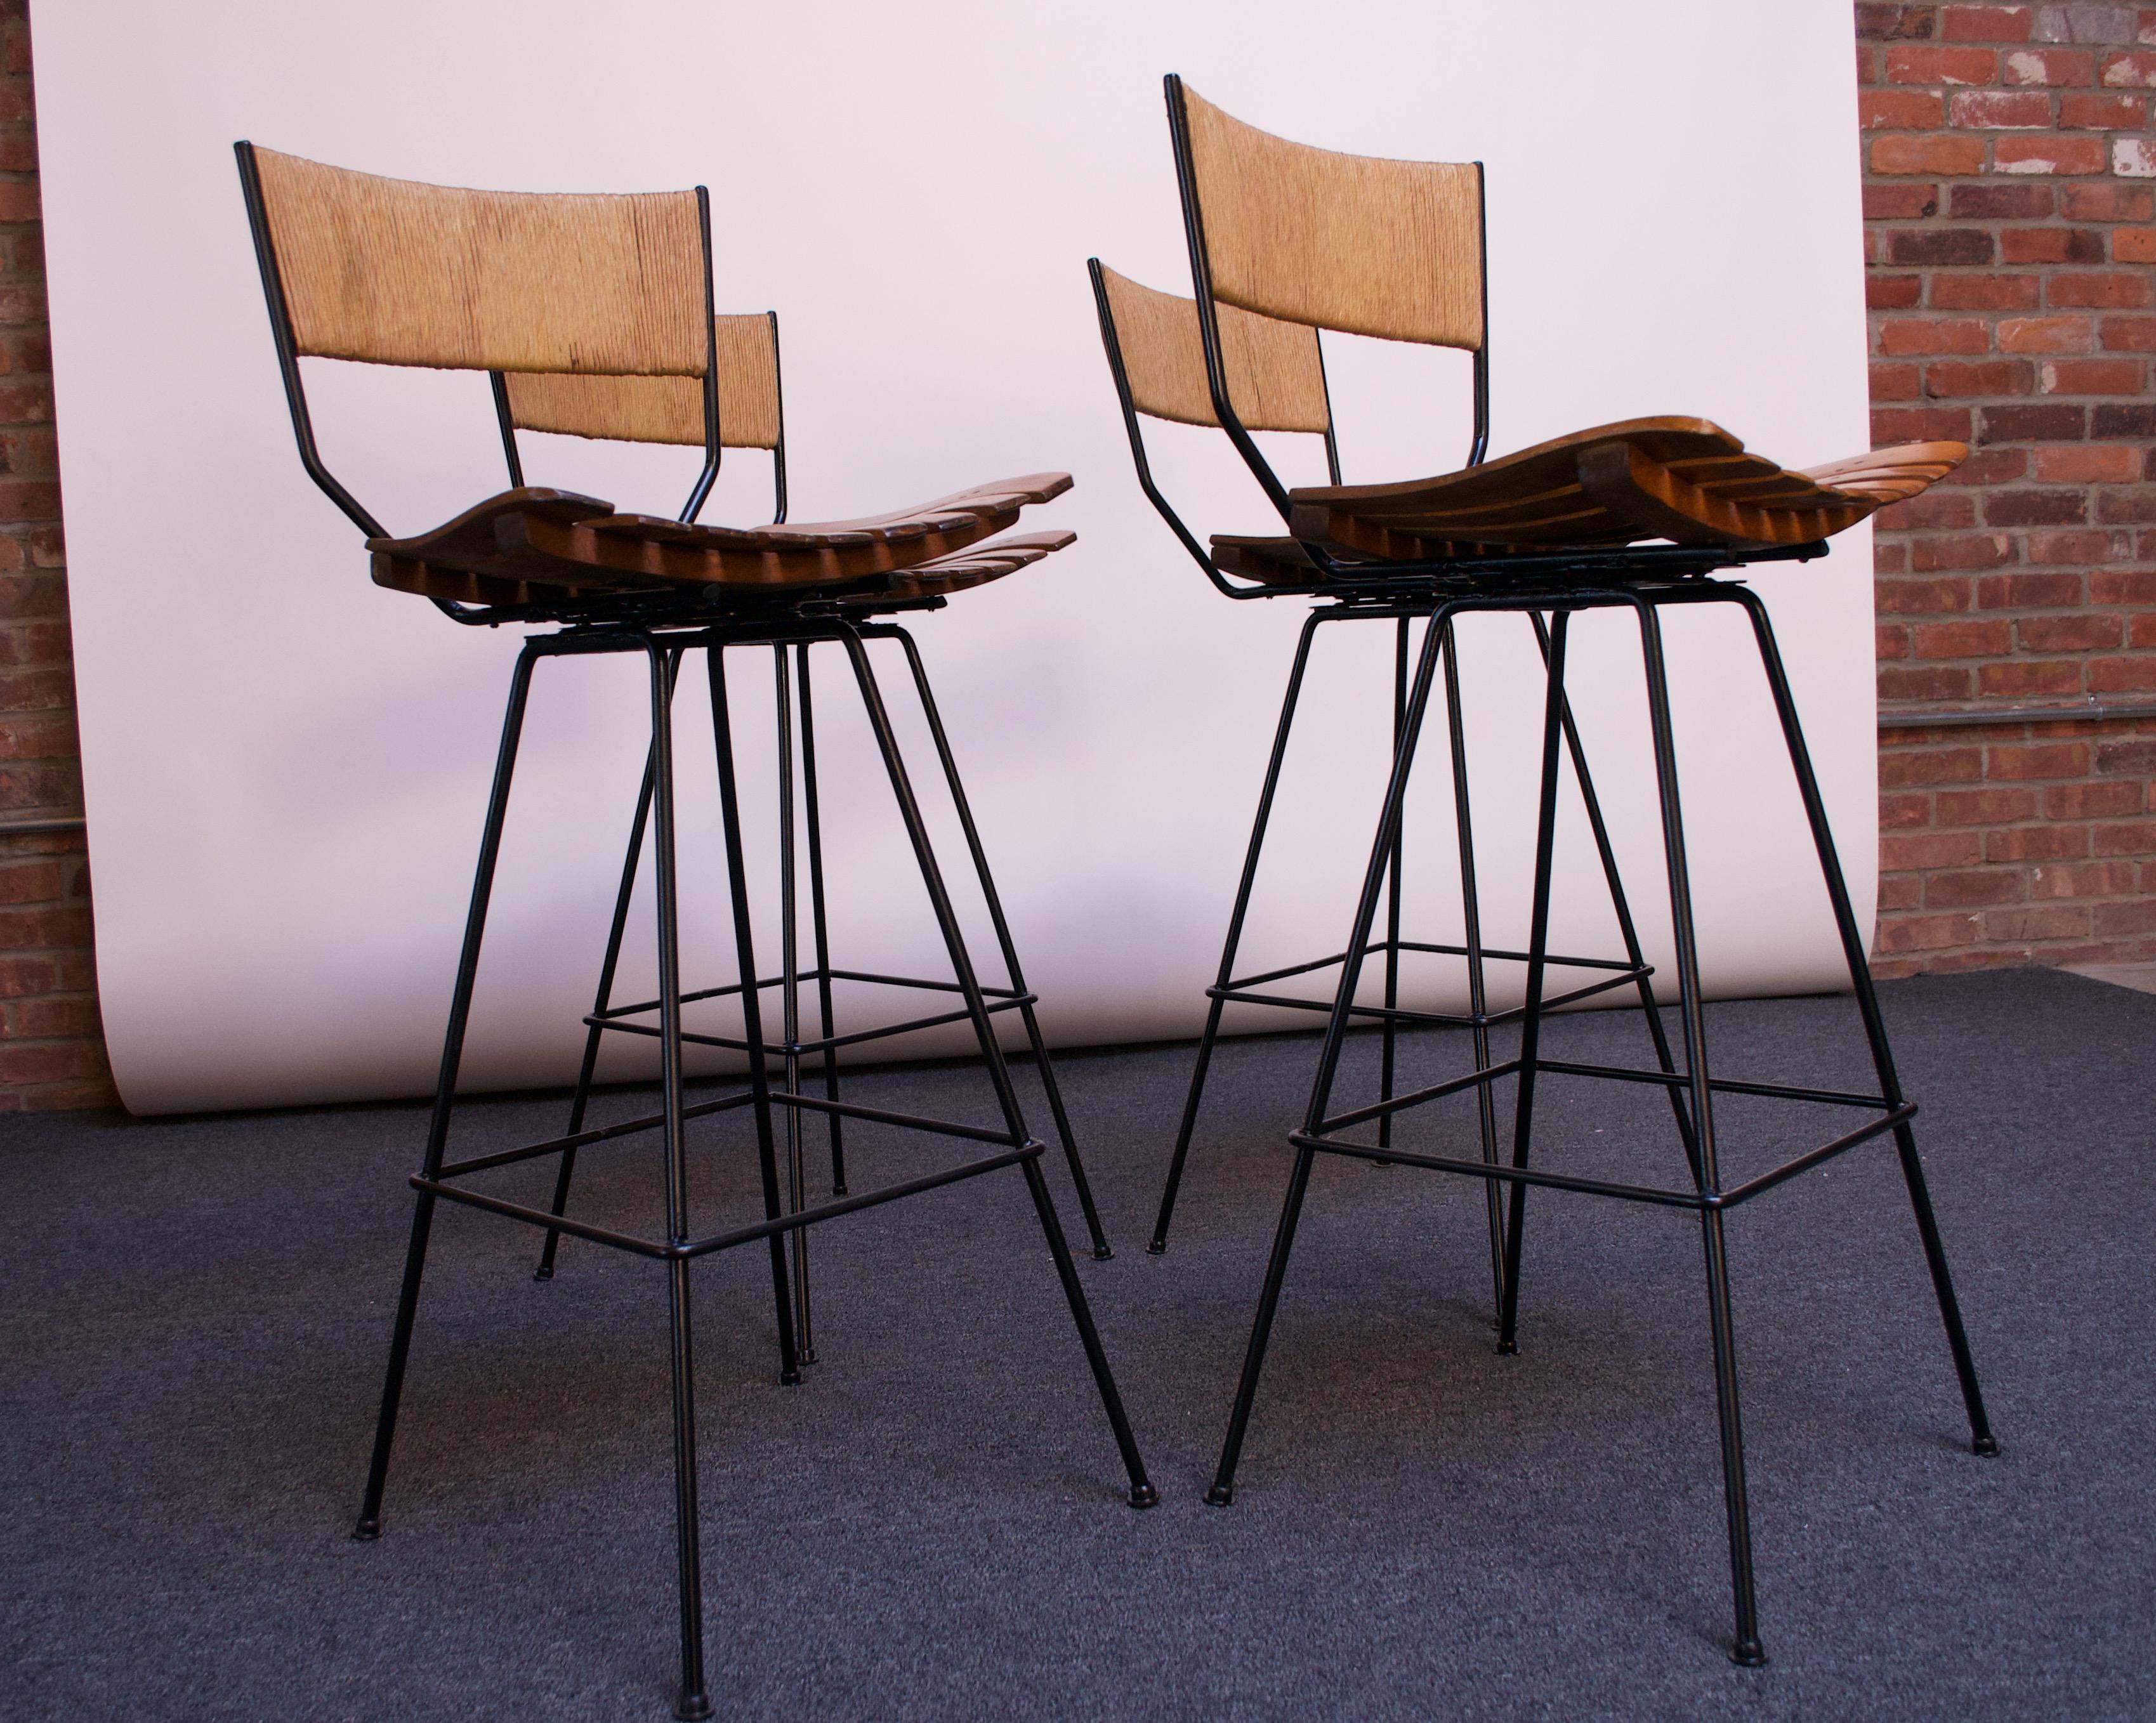 Set of four Arthur Umanoff for Shaver Howard bar stools composed of wrought iron frames with stained birch-slatted seats. Modernist, rectangular rush back adds a striking contrast to an otherwise modest form. Swivel seat allows for full 360 degree